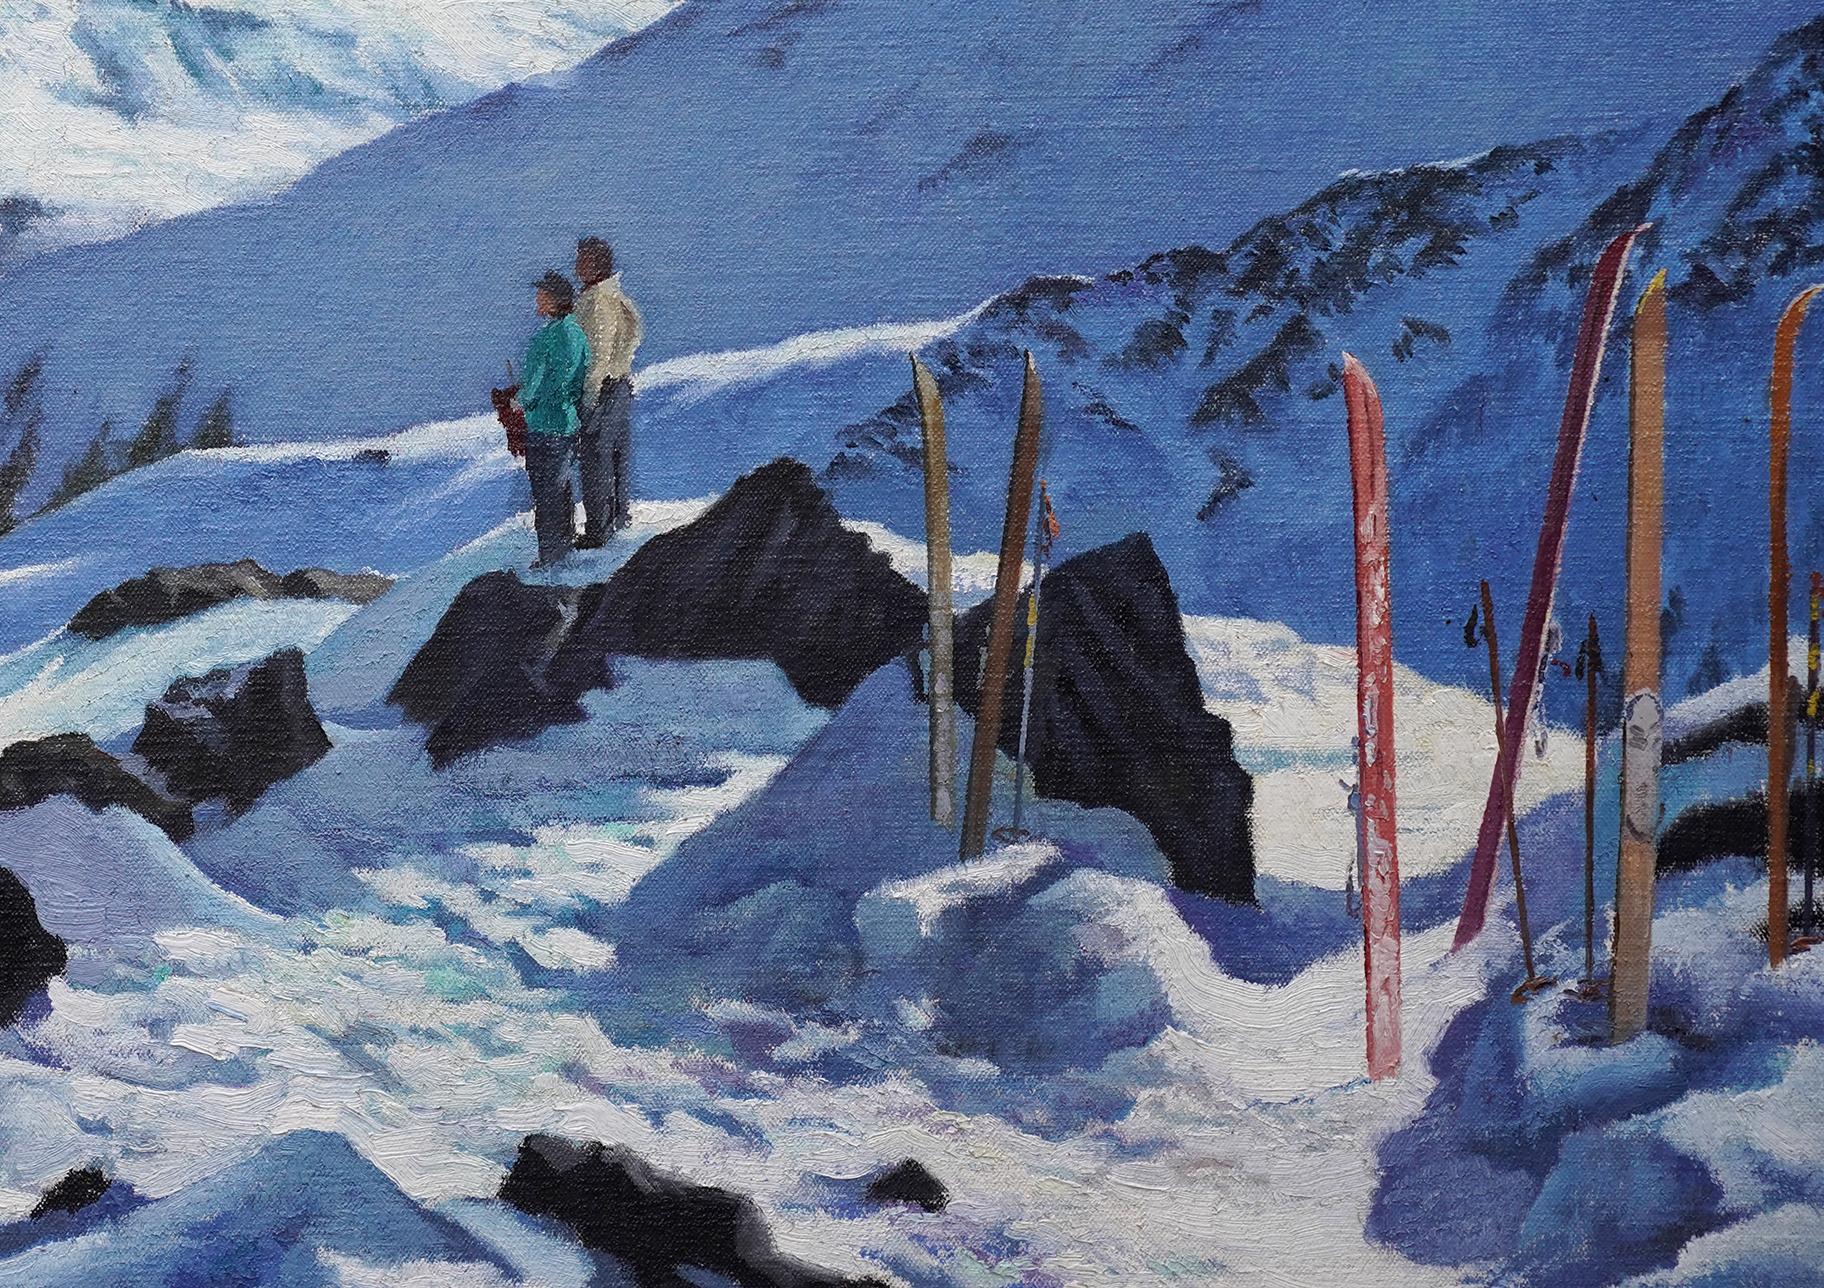 Couple in a Snowy Mountainous Landscape - British 1940's art skiing oil painting For Sale 2